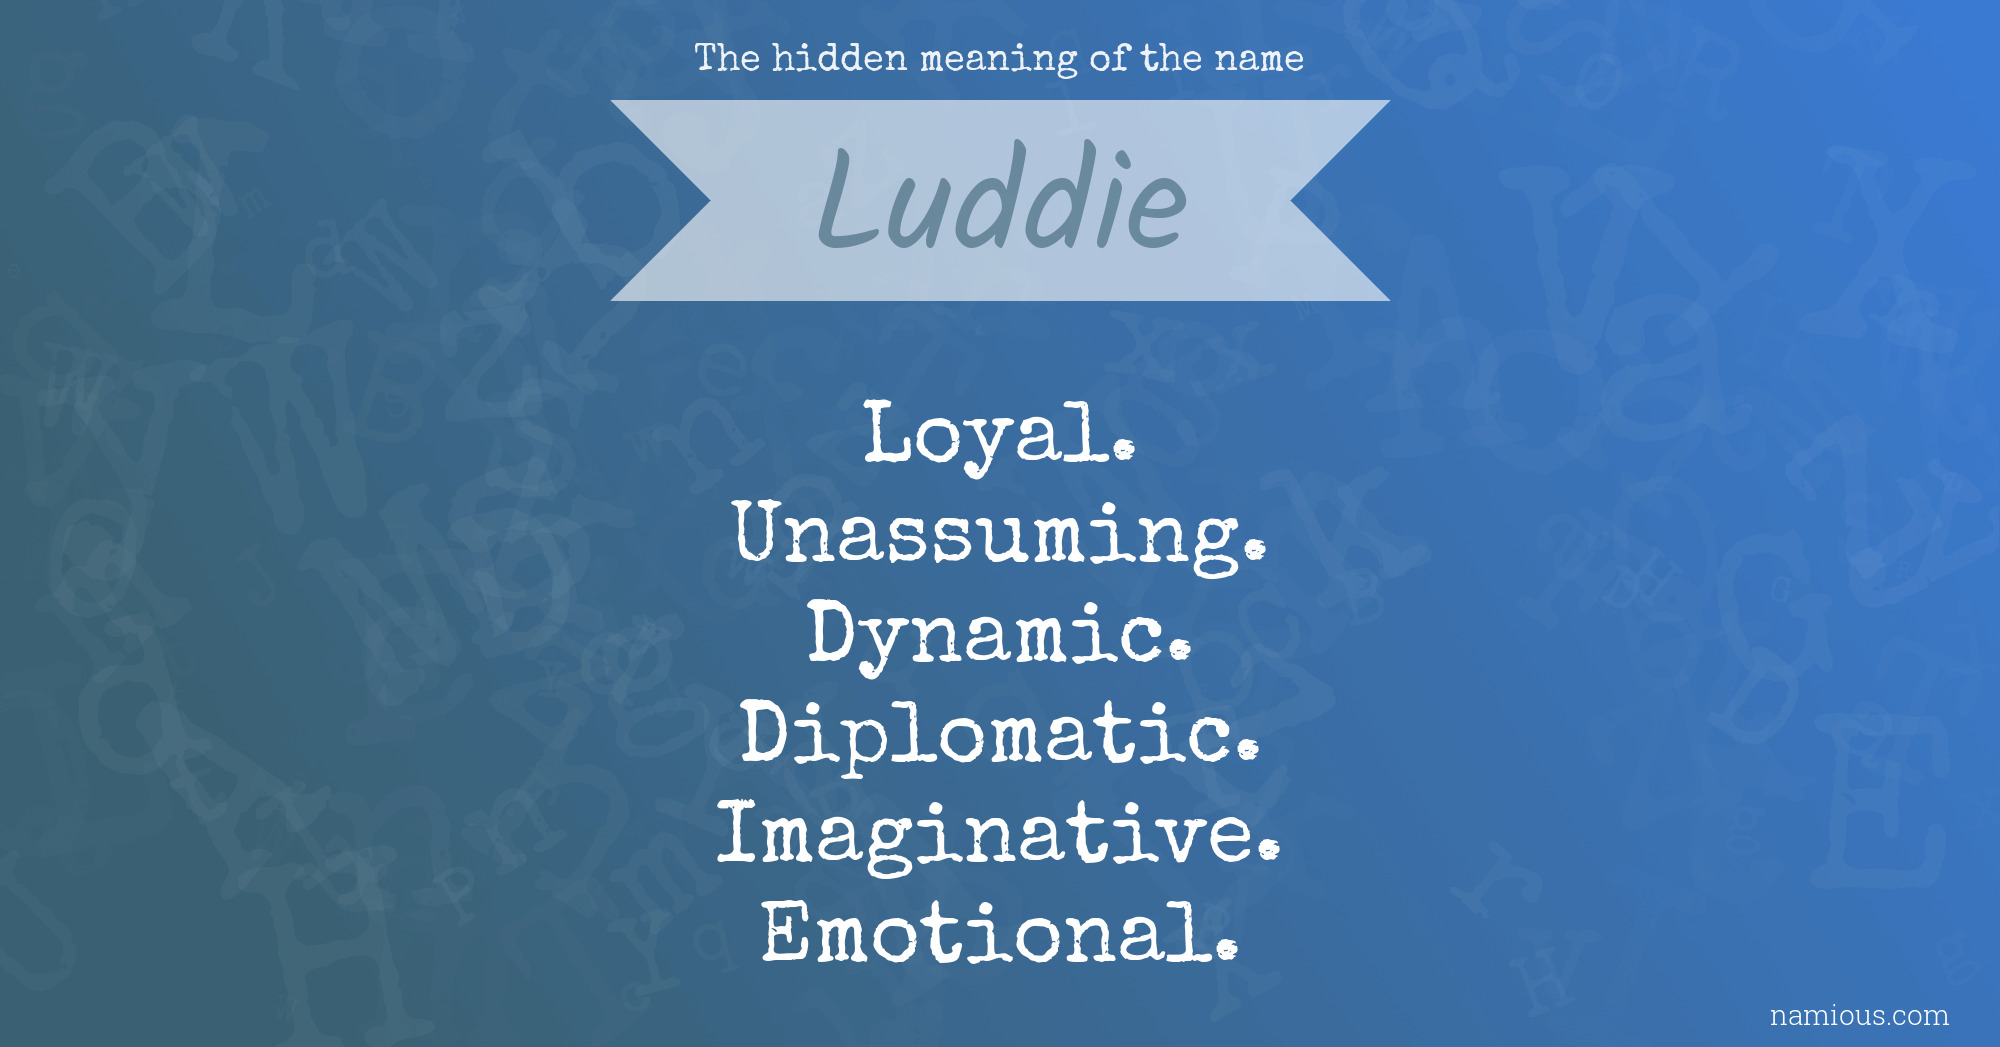 The hidden meaning of the name Luddie